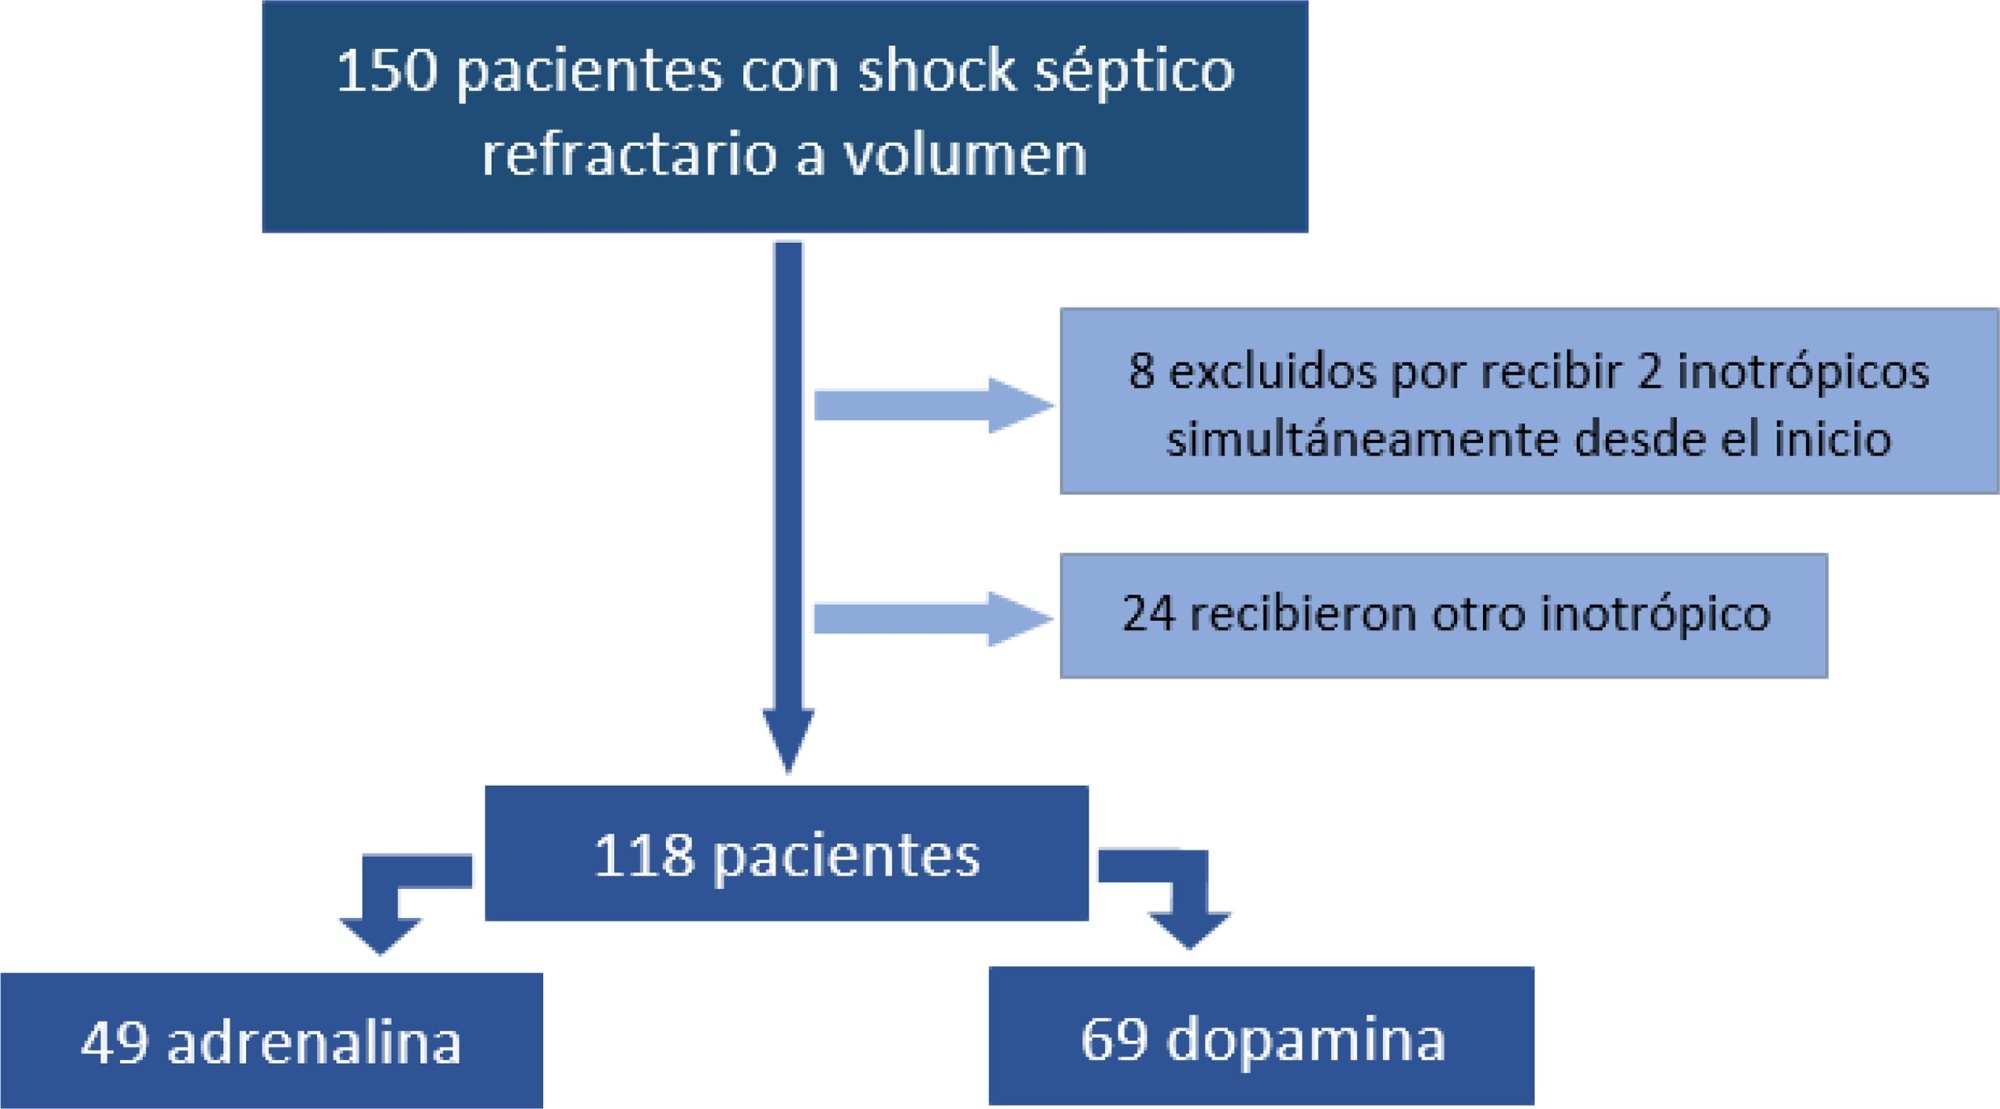 Clinical outcome of children with fluid-refractory septic shock treated with dopamine or epinephrine. A retrospective study at a pediatric emergency department in Argentina